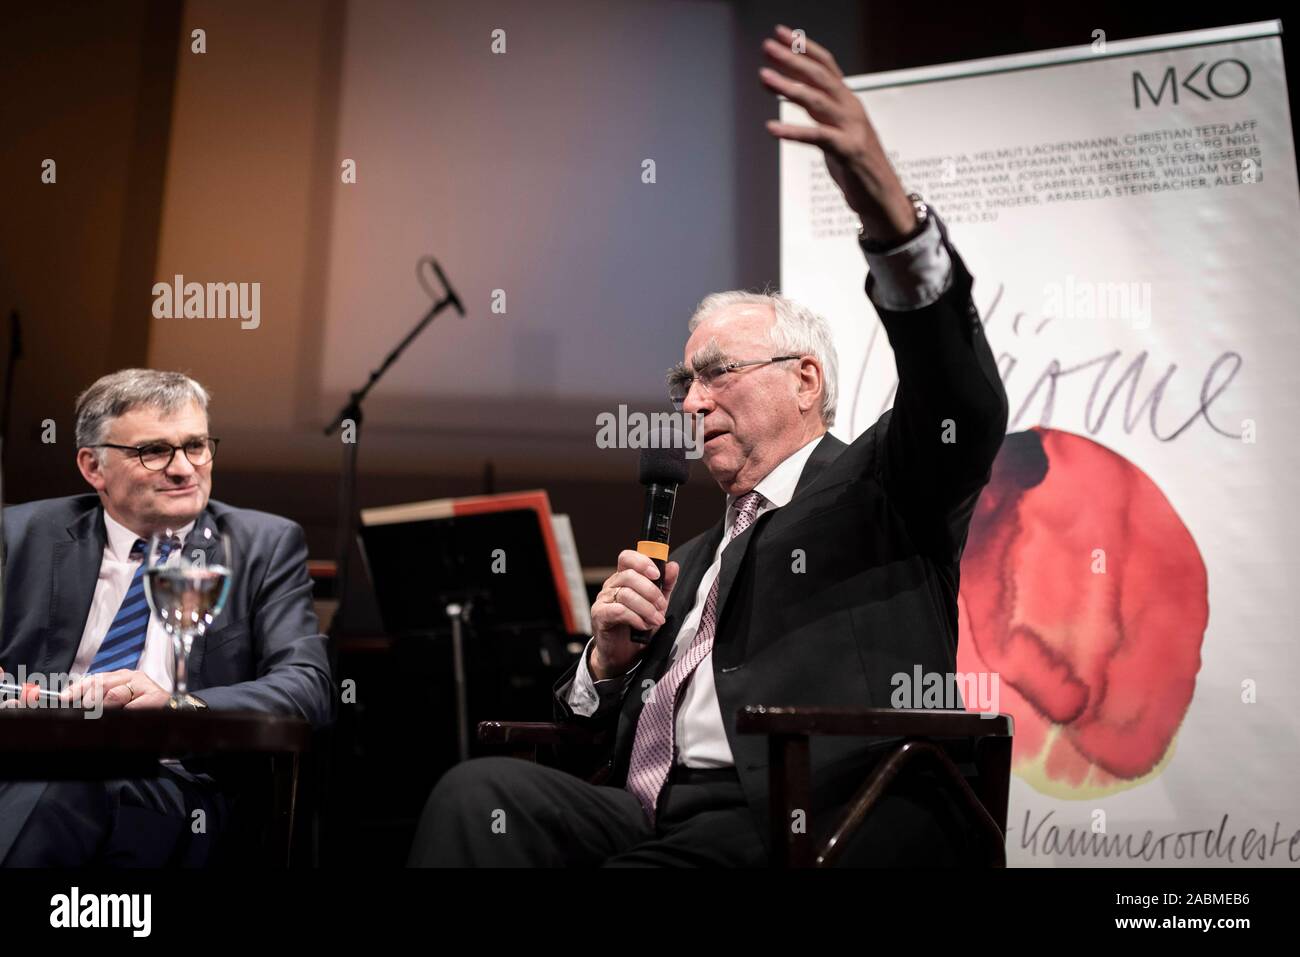 At the beginning of the series 'Wärme und Wallung' of the 'Süddeutsche Zeitung' and the Munich Chamber Orchestra, Clemens Schuldt, Stefan Kornelius and Theo Waigel discuss Germany 30 years after reunification in the Munich Prinzregententheater: SZ journalist Stefan Kornelius (left) and Theo Waigel of the CSU (right). [automated translation] Stock Photo